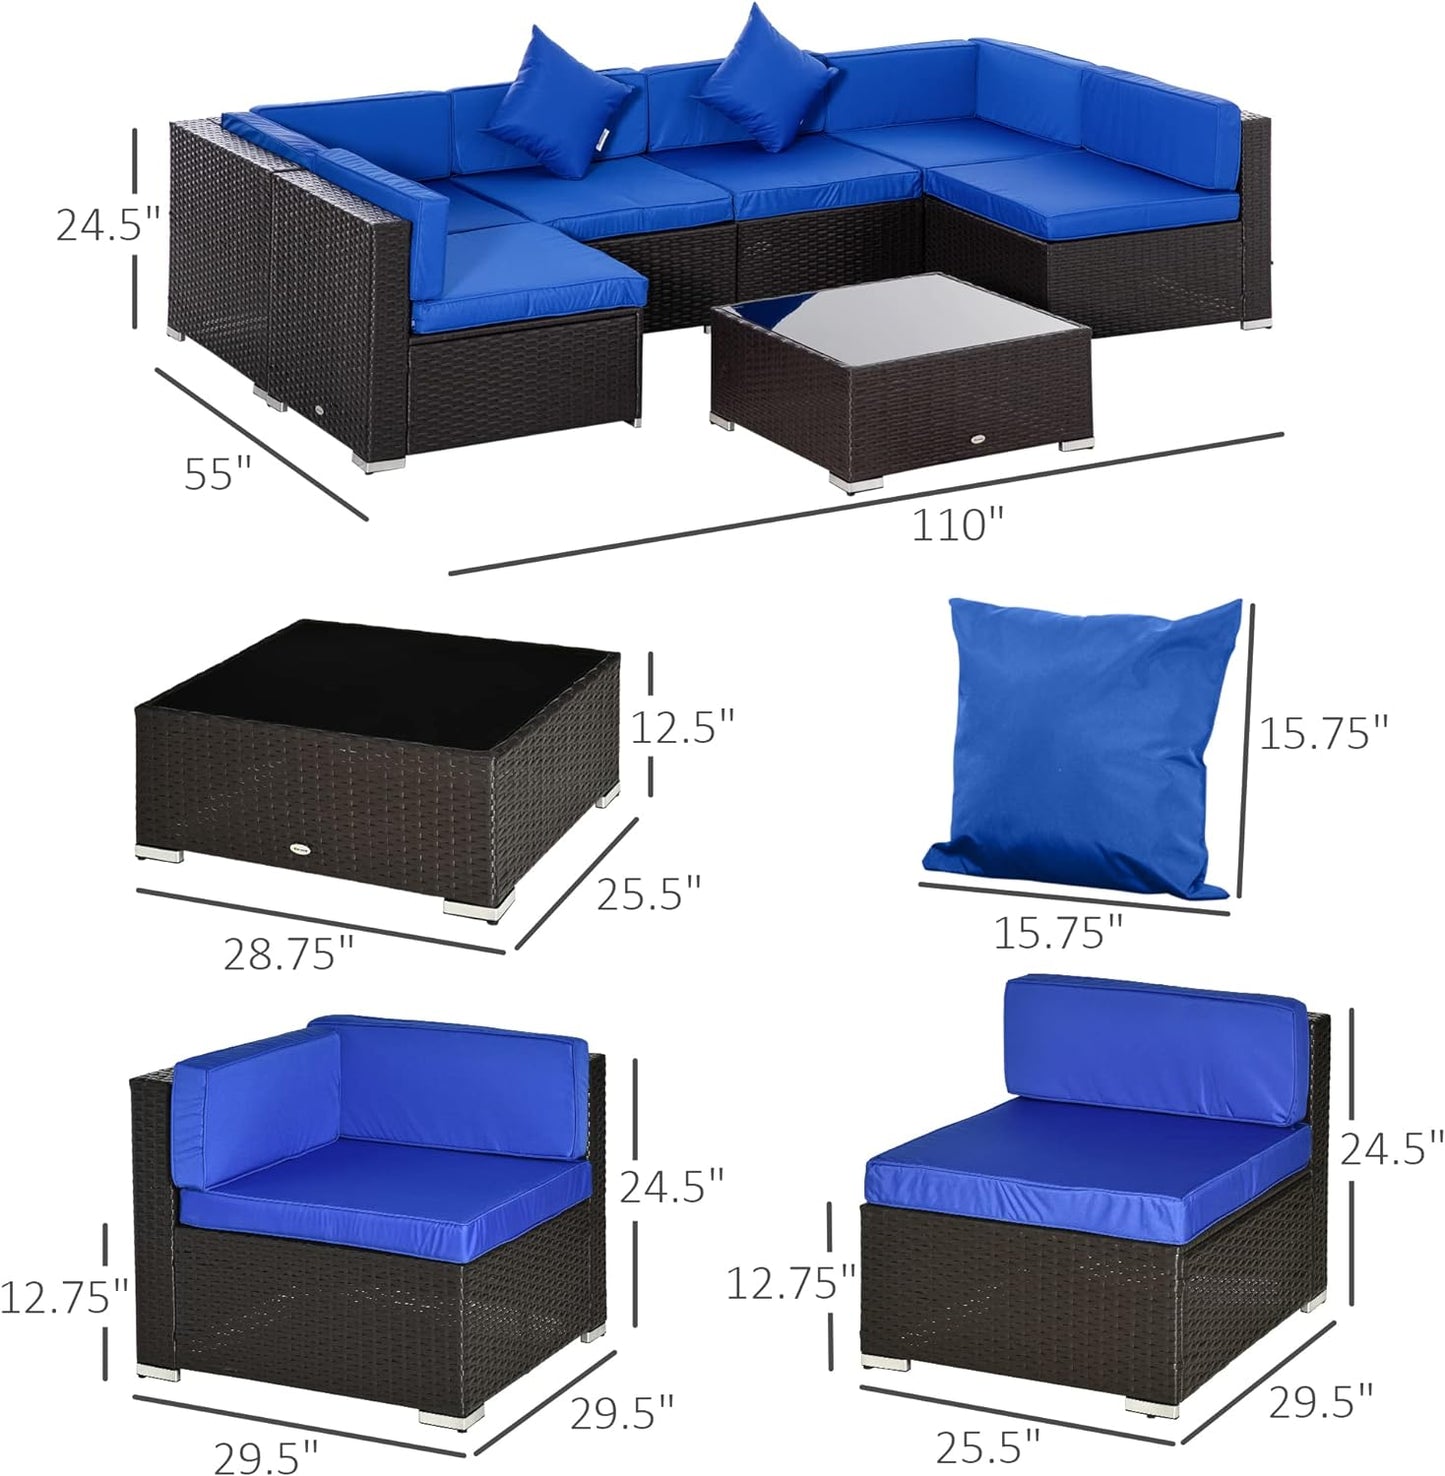 7 Piece Patio Furniture Set, PE Rattan Outdoor Conversation Set with Sectional Sofa, Glass Tabletop, Cushions and Pillows for Garden, Lawn, Deck, Dark Brown and Blue